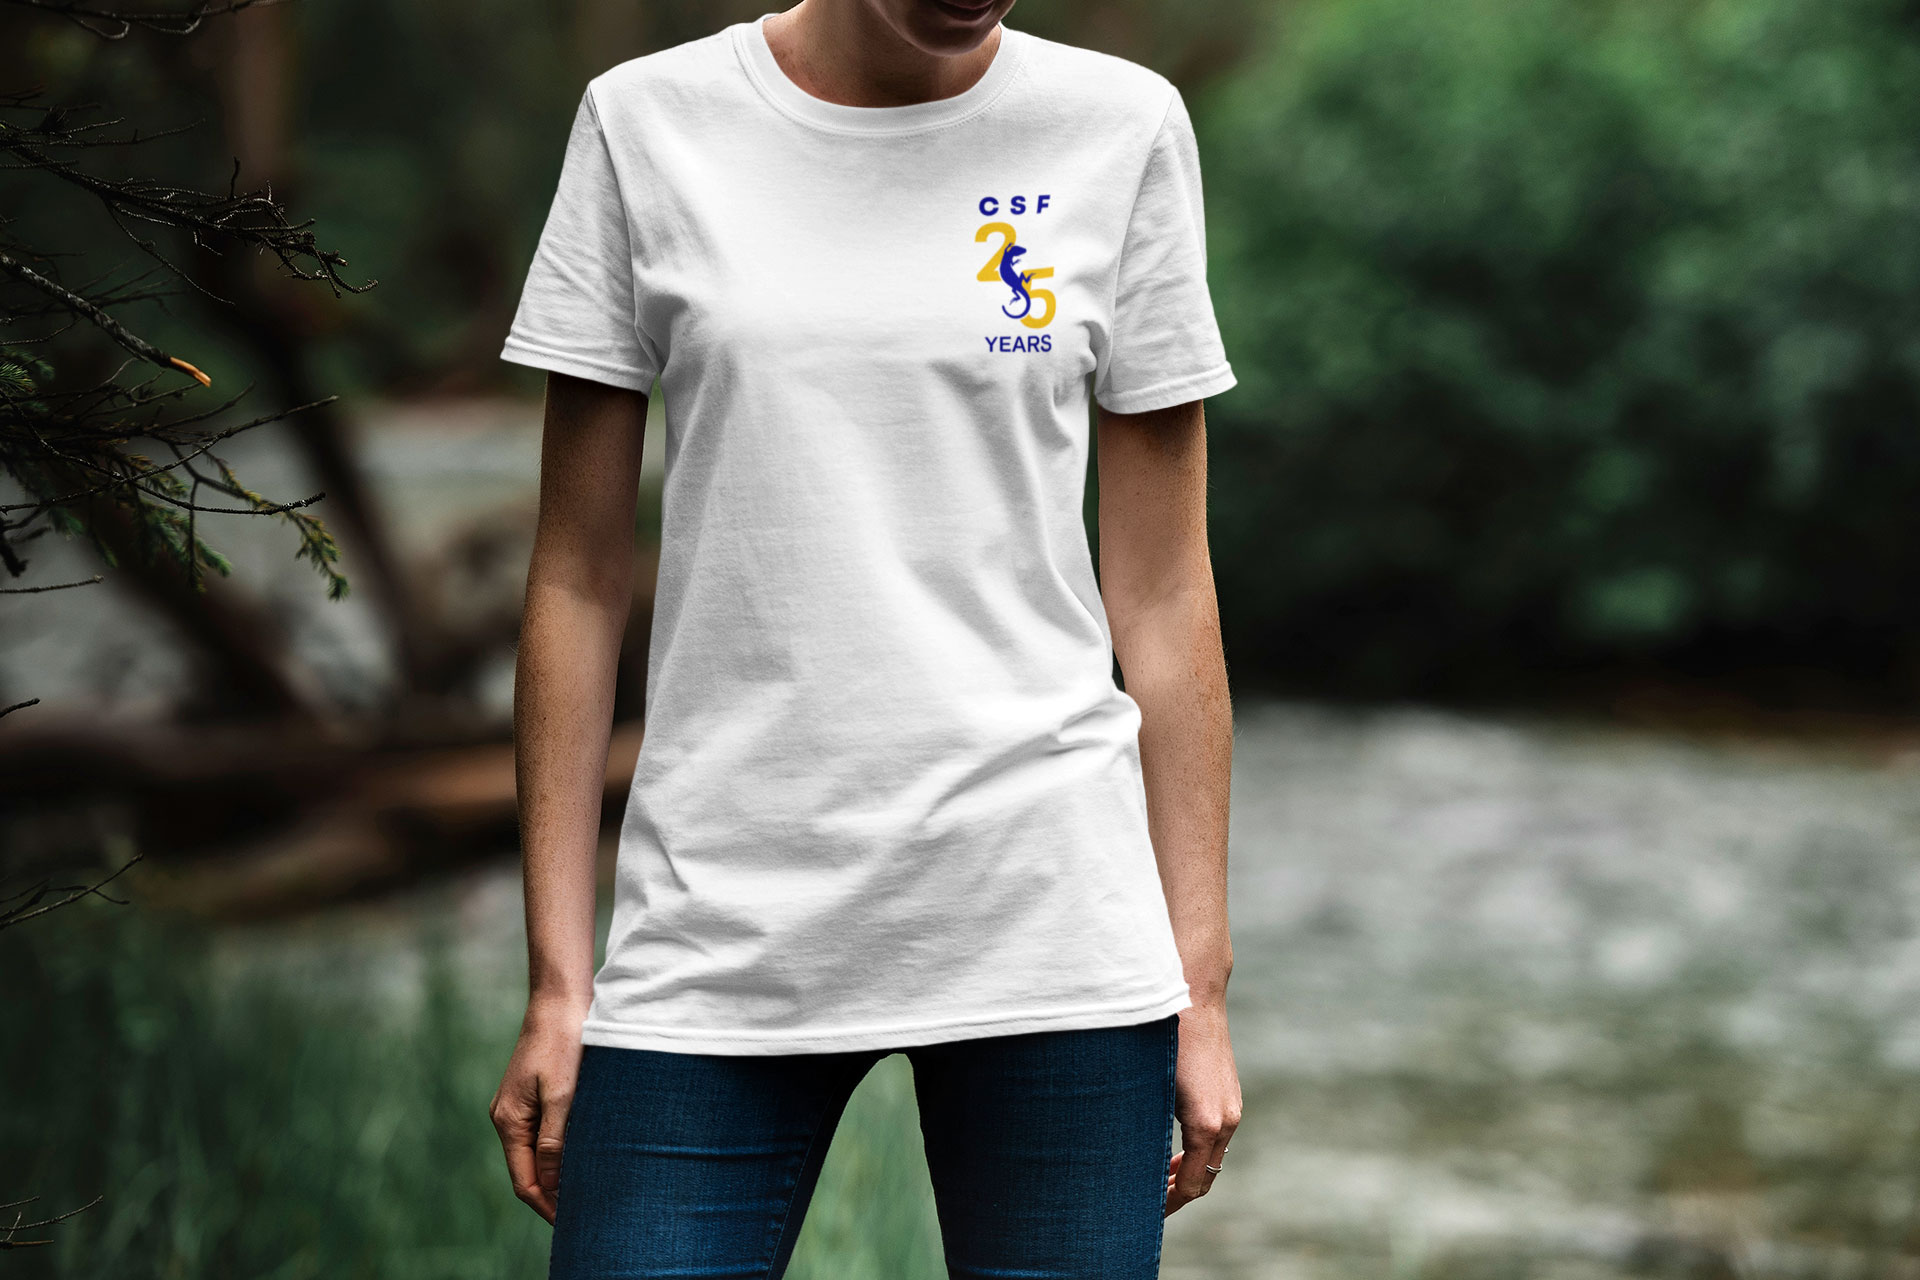 mockup-of-a-woman-wearing-a-t-shirt-in-an-outdoors-scenery-1851-el1